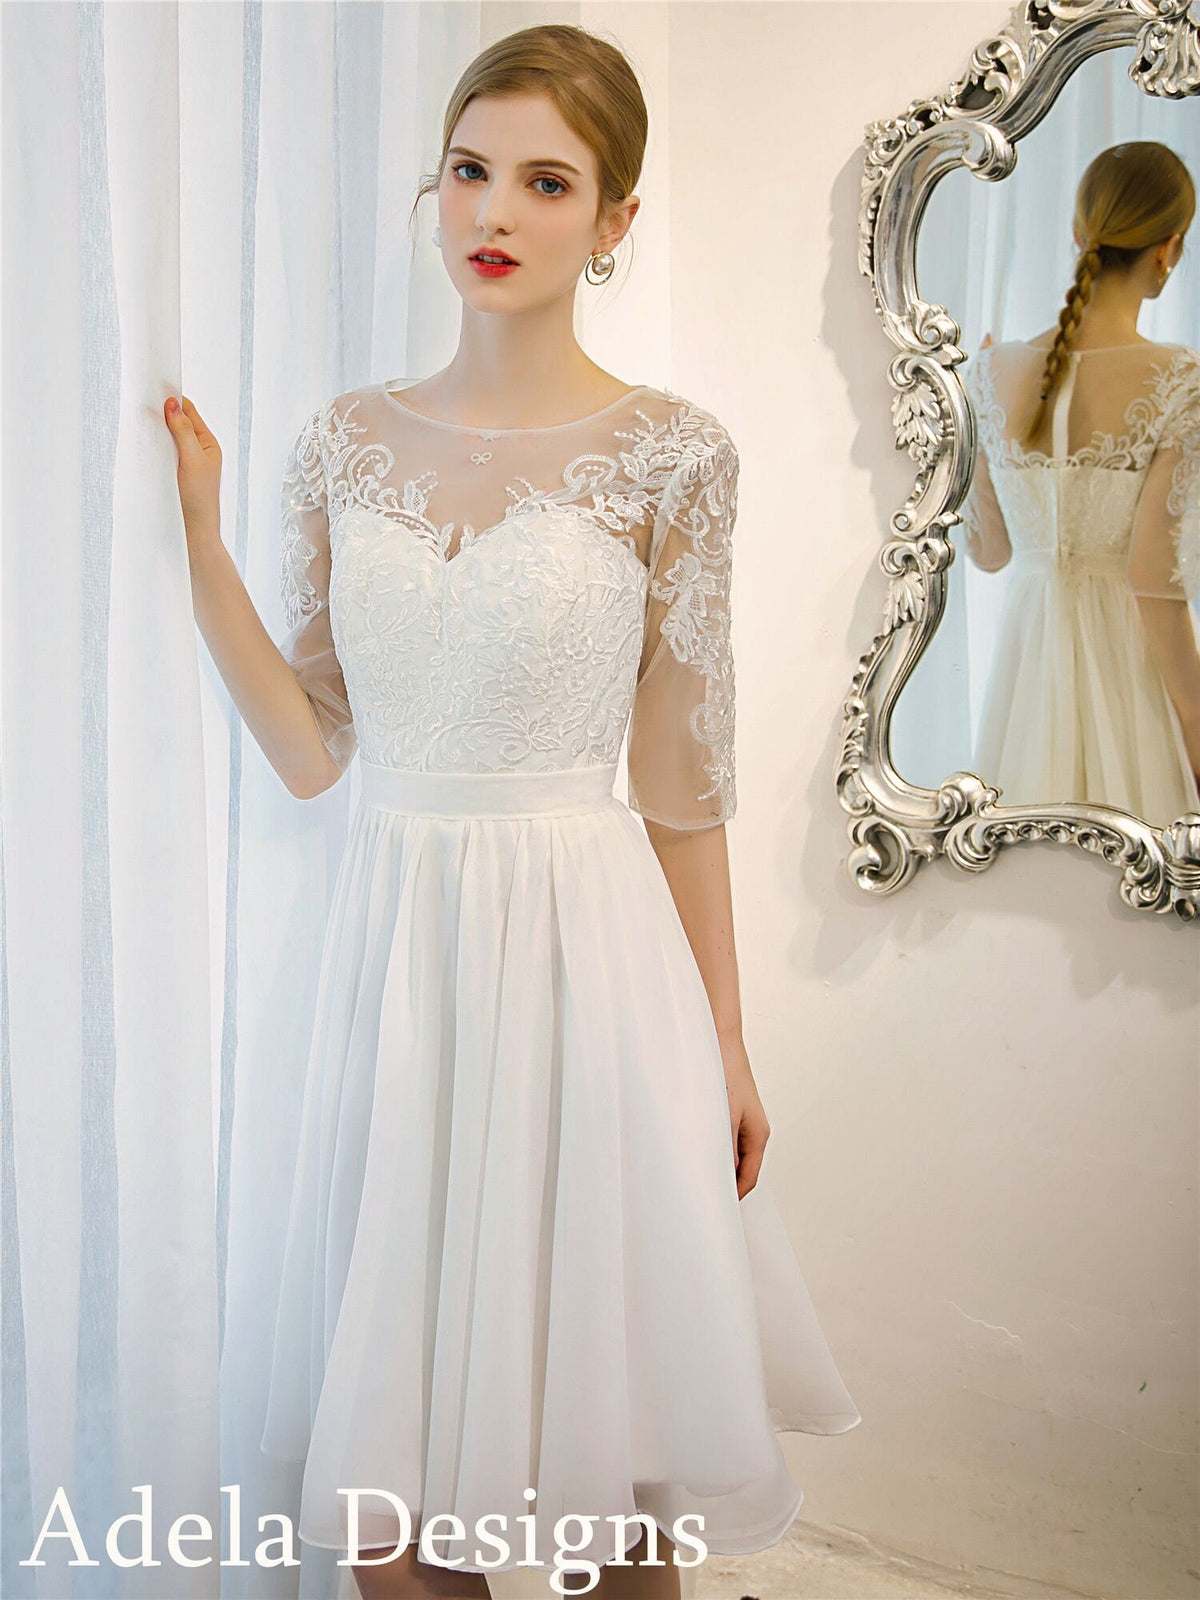 Vintage Style Knee Length Chiffon Short 3/4 Sleeves Wedding Dress Bridal Gown Classic Lace Reception Dress Formal Bridal Shower